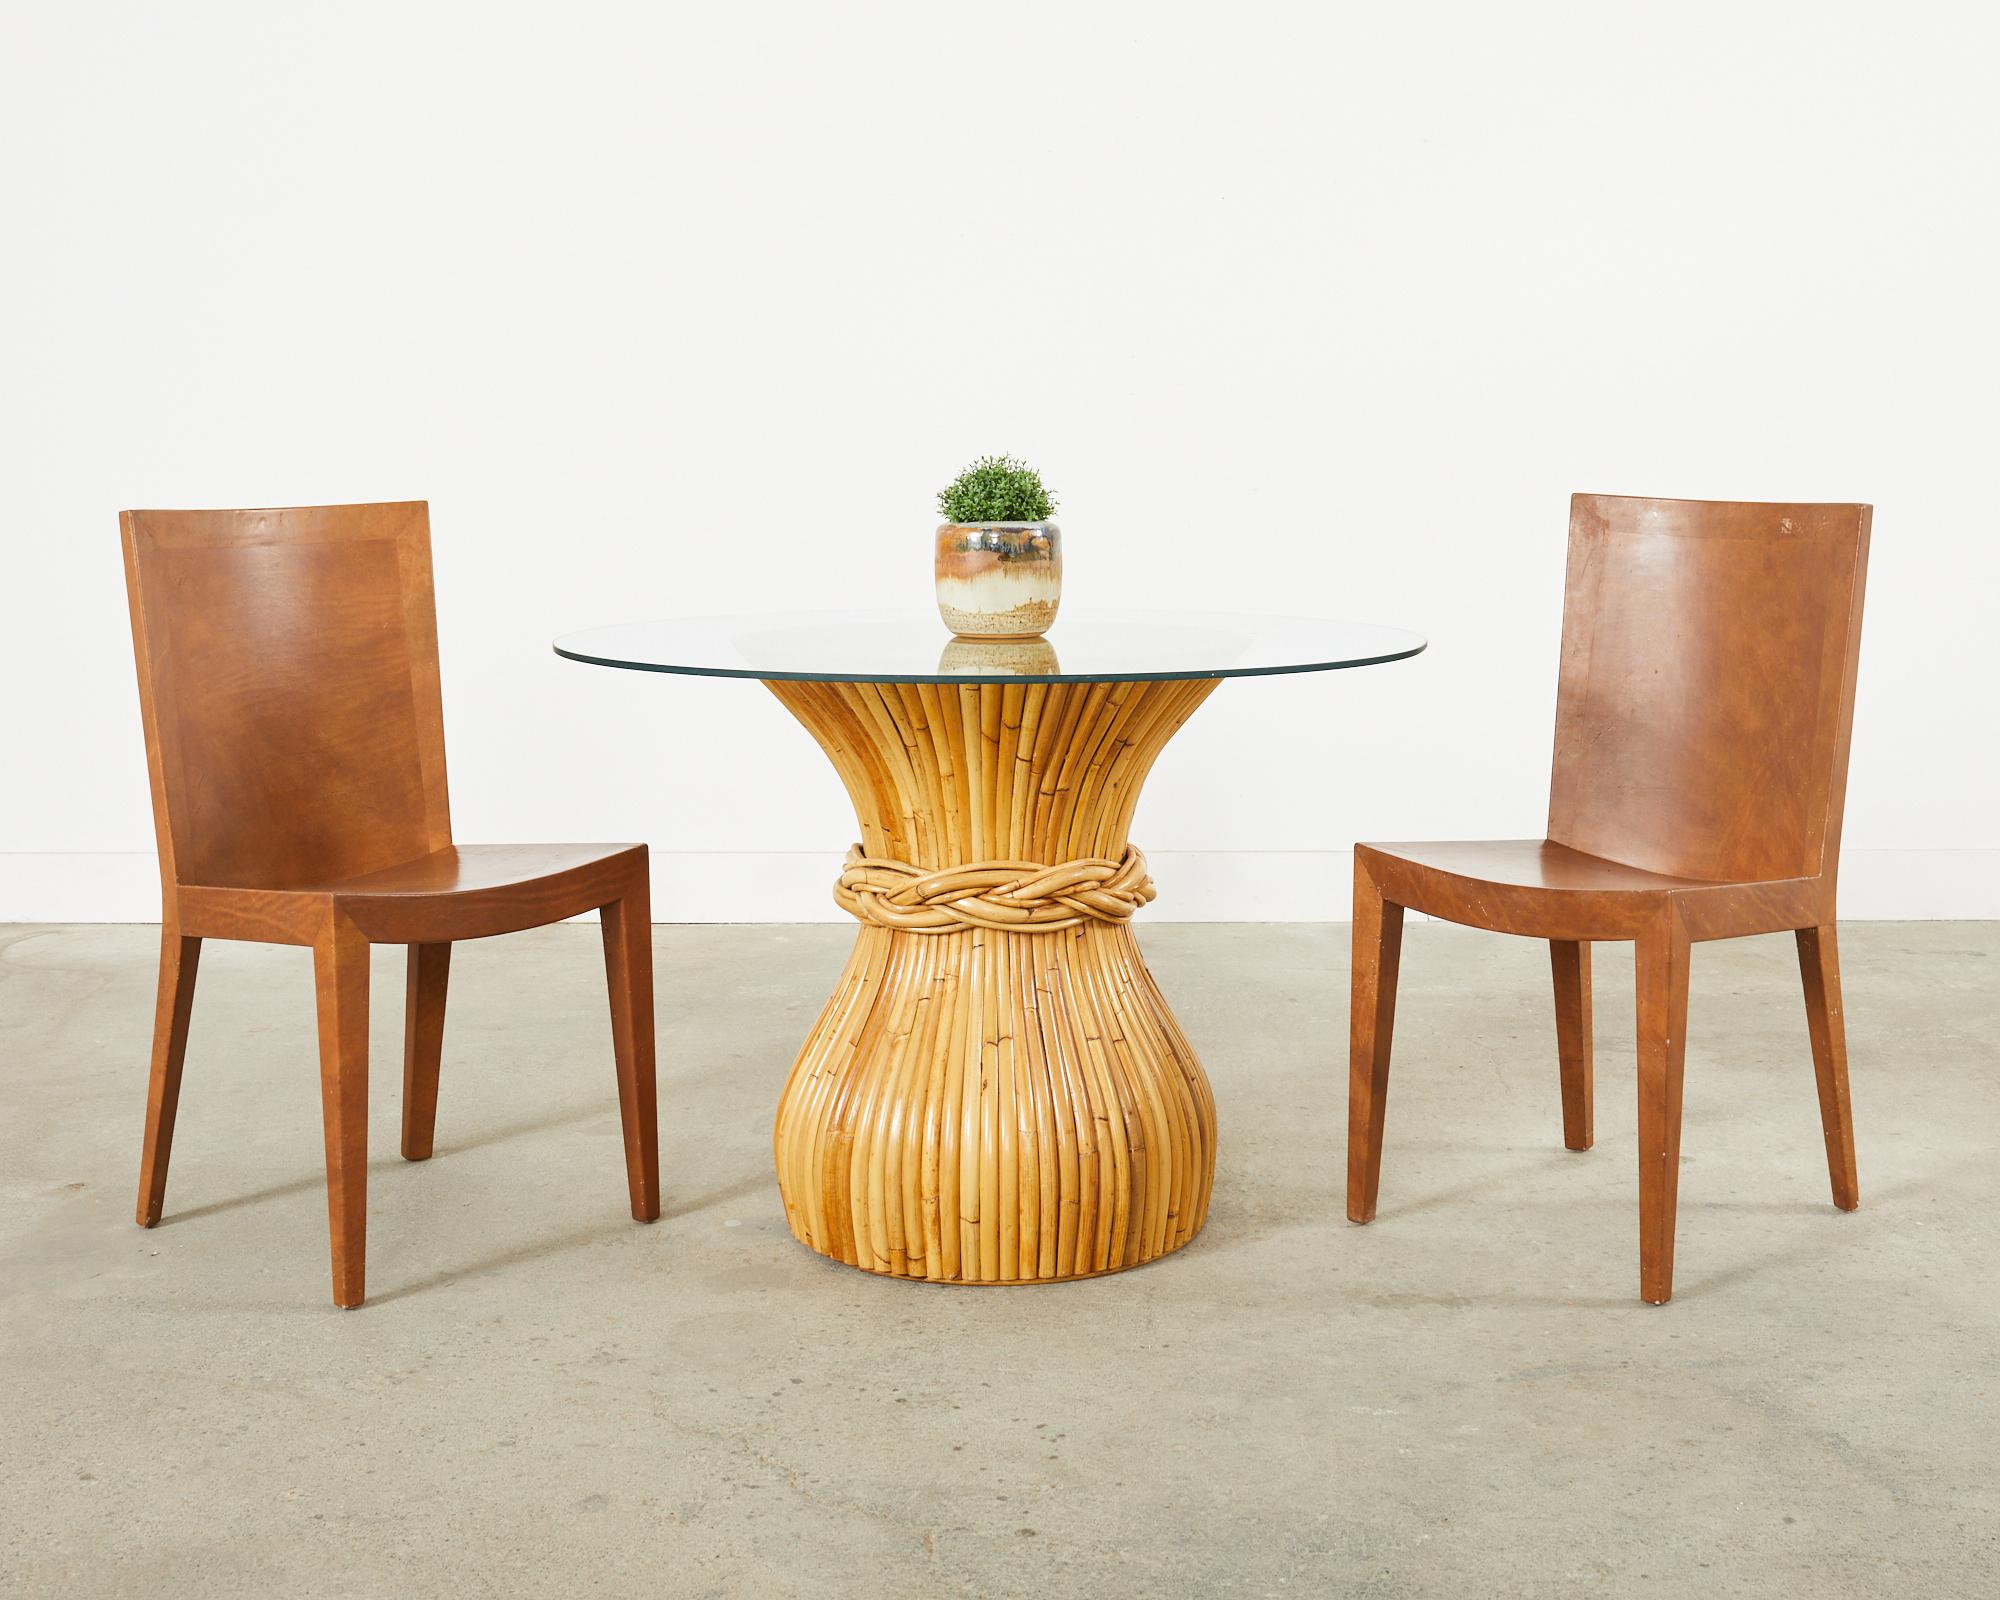 Gorgeous hourglass form dining table or breakfast table made in the California coastal organic modern style by McGuire. The table features a waisted hourglass formed pedestal completely wrapped with split bamboo rattan poles. The middle of the table